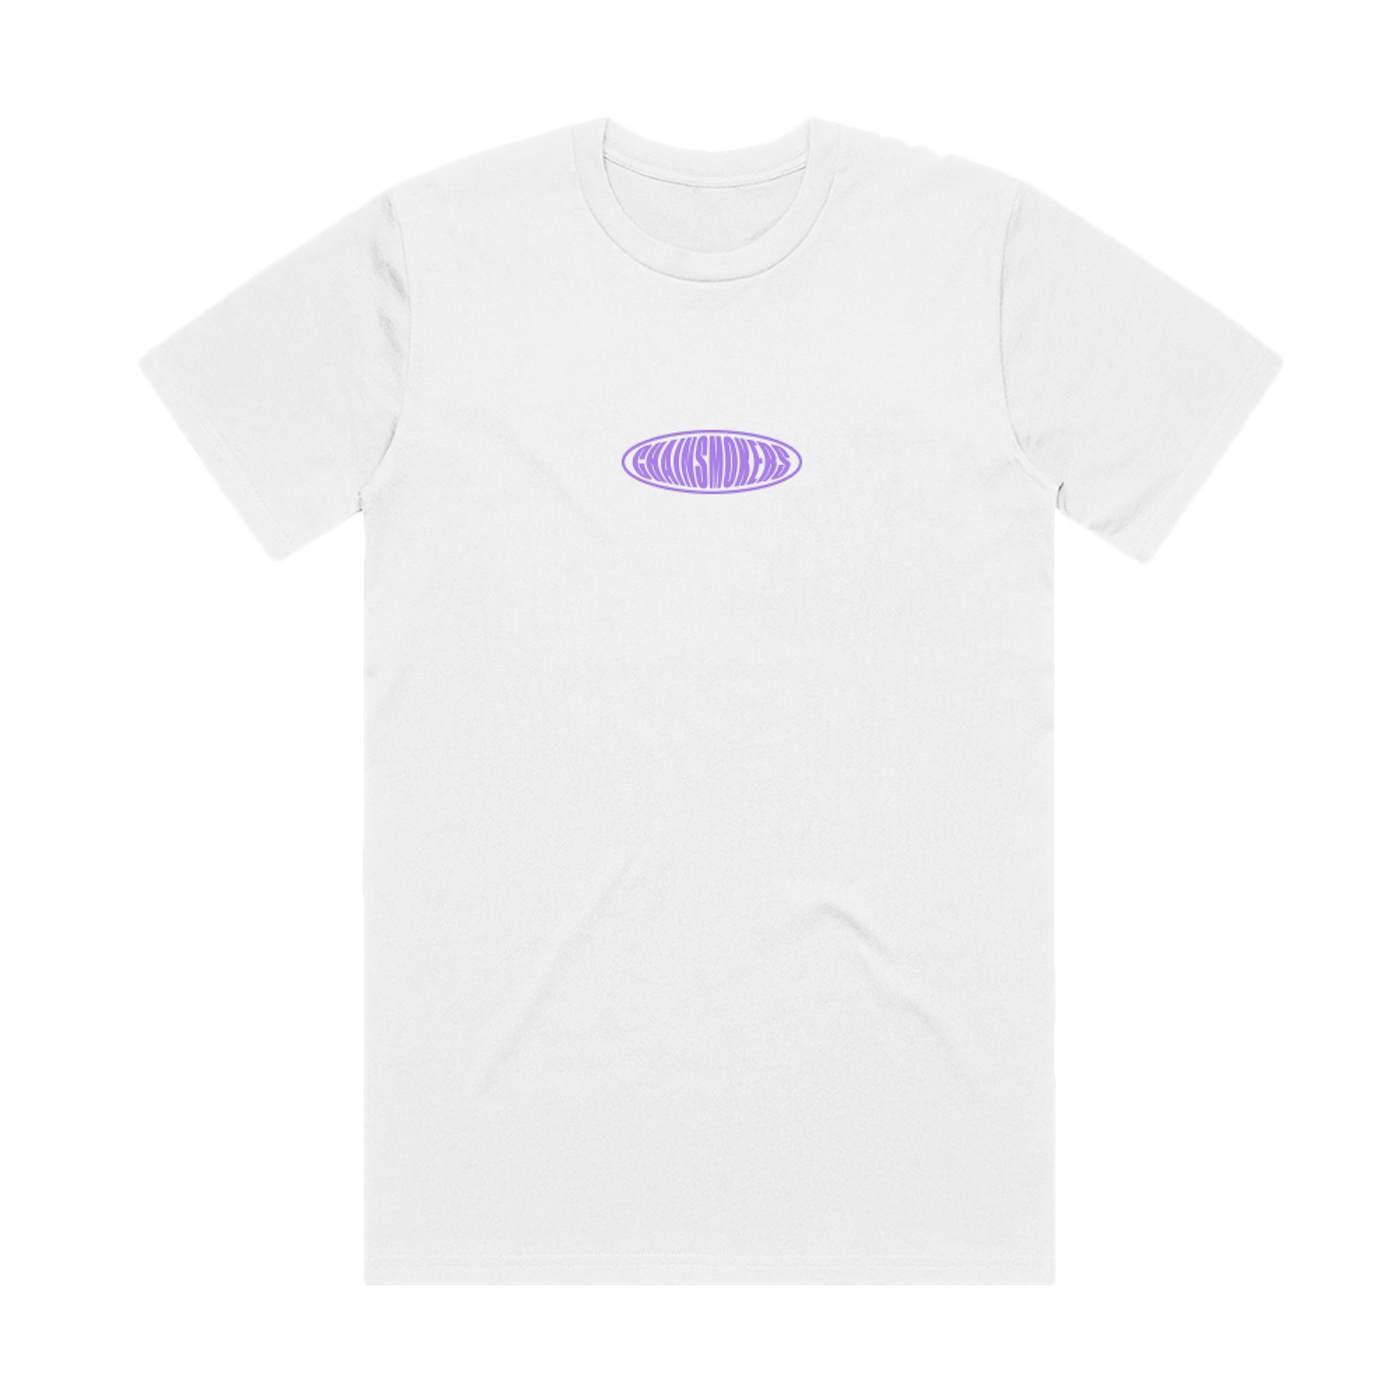 The Chainsmokers Oval Tee White